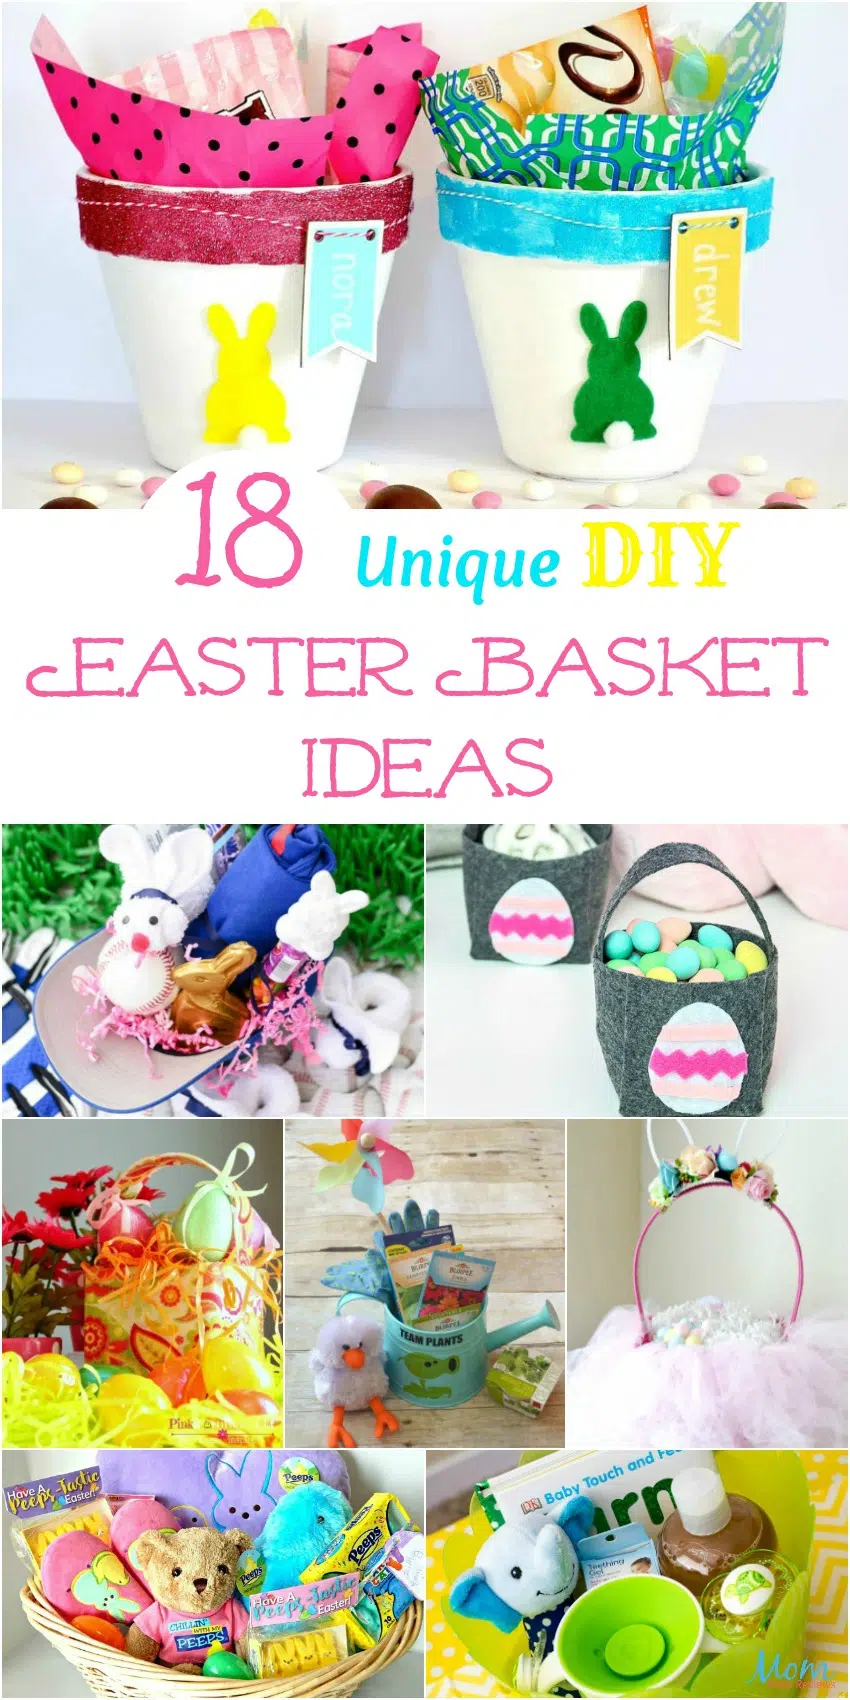 18 Unique DIY Easter Basket Ideas too Cute Not to Try! #easter #diy #easterbunny #easterbasket #crafts